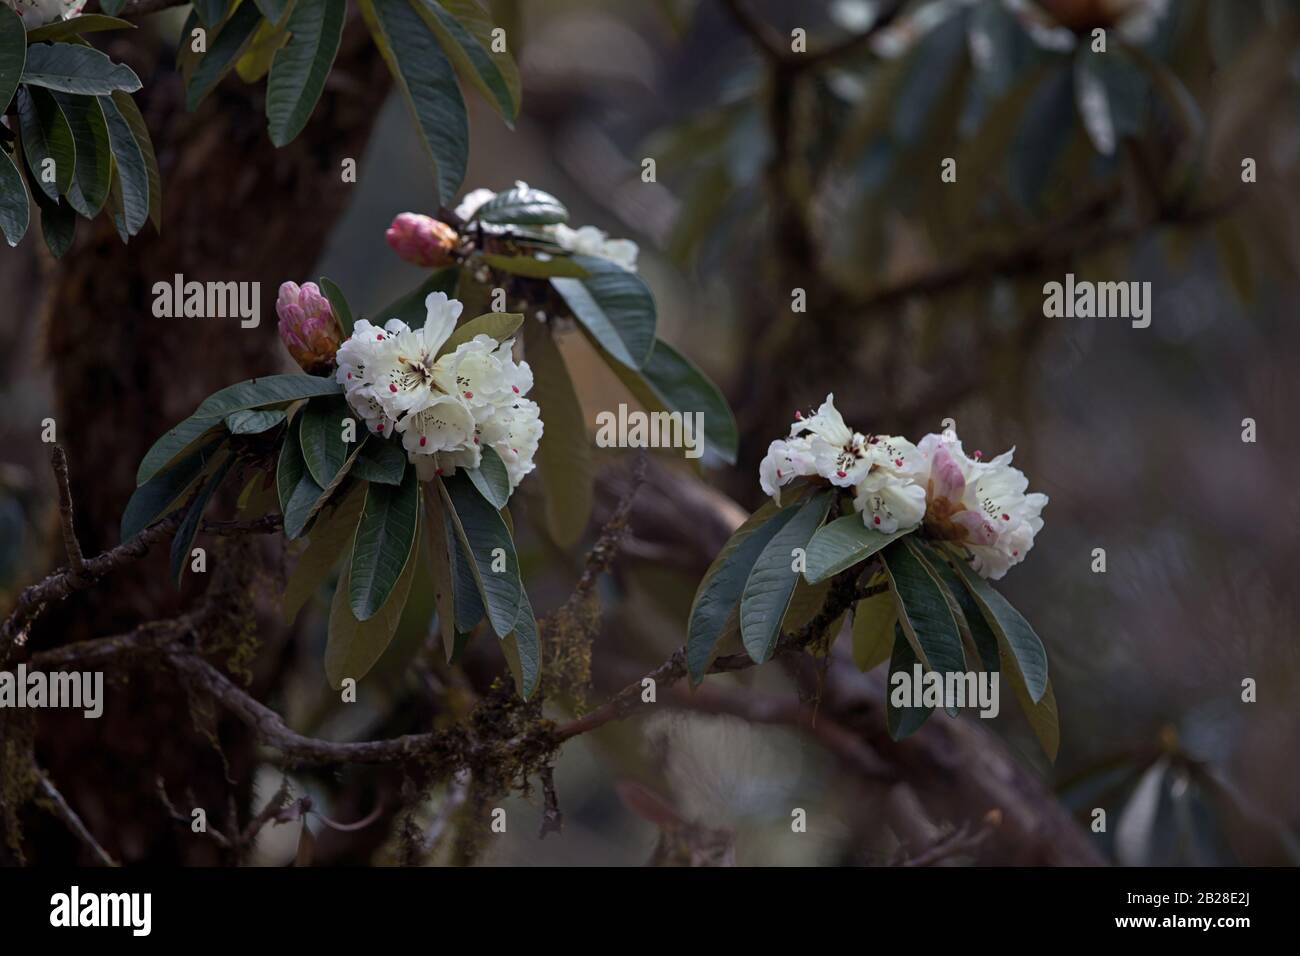 Flowering white Rhododendron in the forest of the bhutanese himalayan foothills Stock Photo